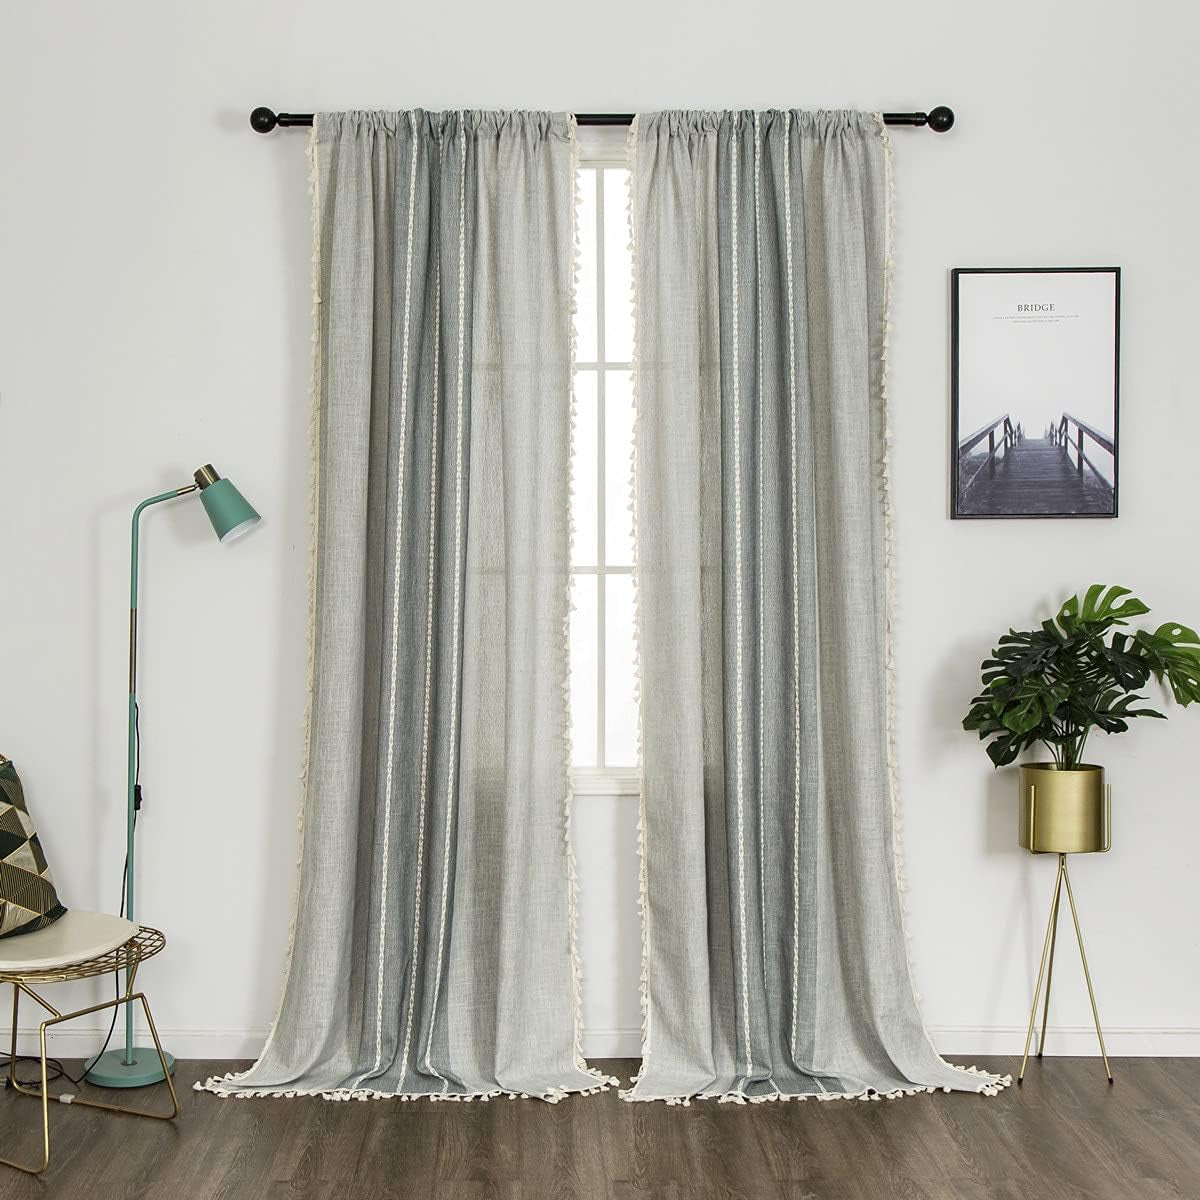 Amidoudou 1 Pair Cotton Linen Boho Curtains with Tassel, Farmhouse Curtains for Bedroom Living Room (Beige and Coffee, 2 X 54 X 96 Inch)  Amidoudou Light Gray And Gray 2 X 54" X 84" 